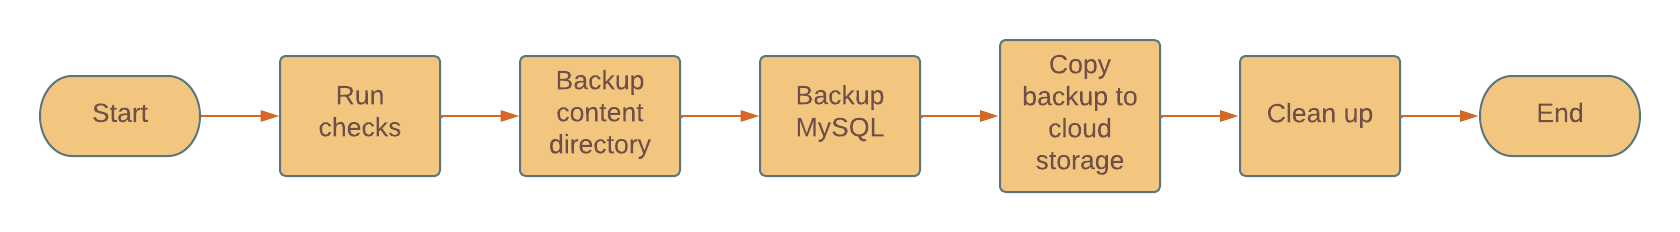 An overview of what our backup script